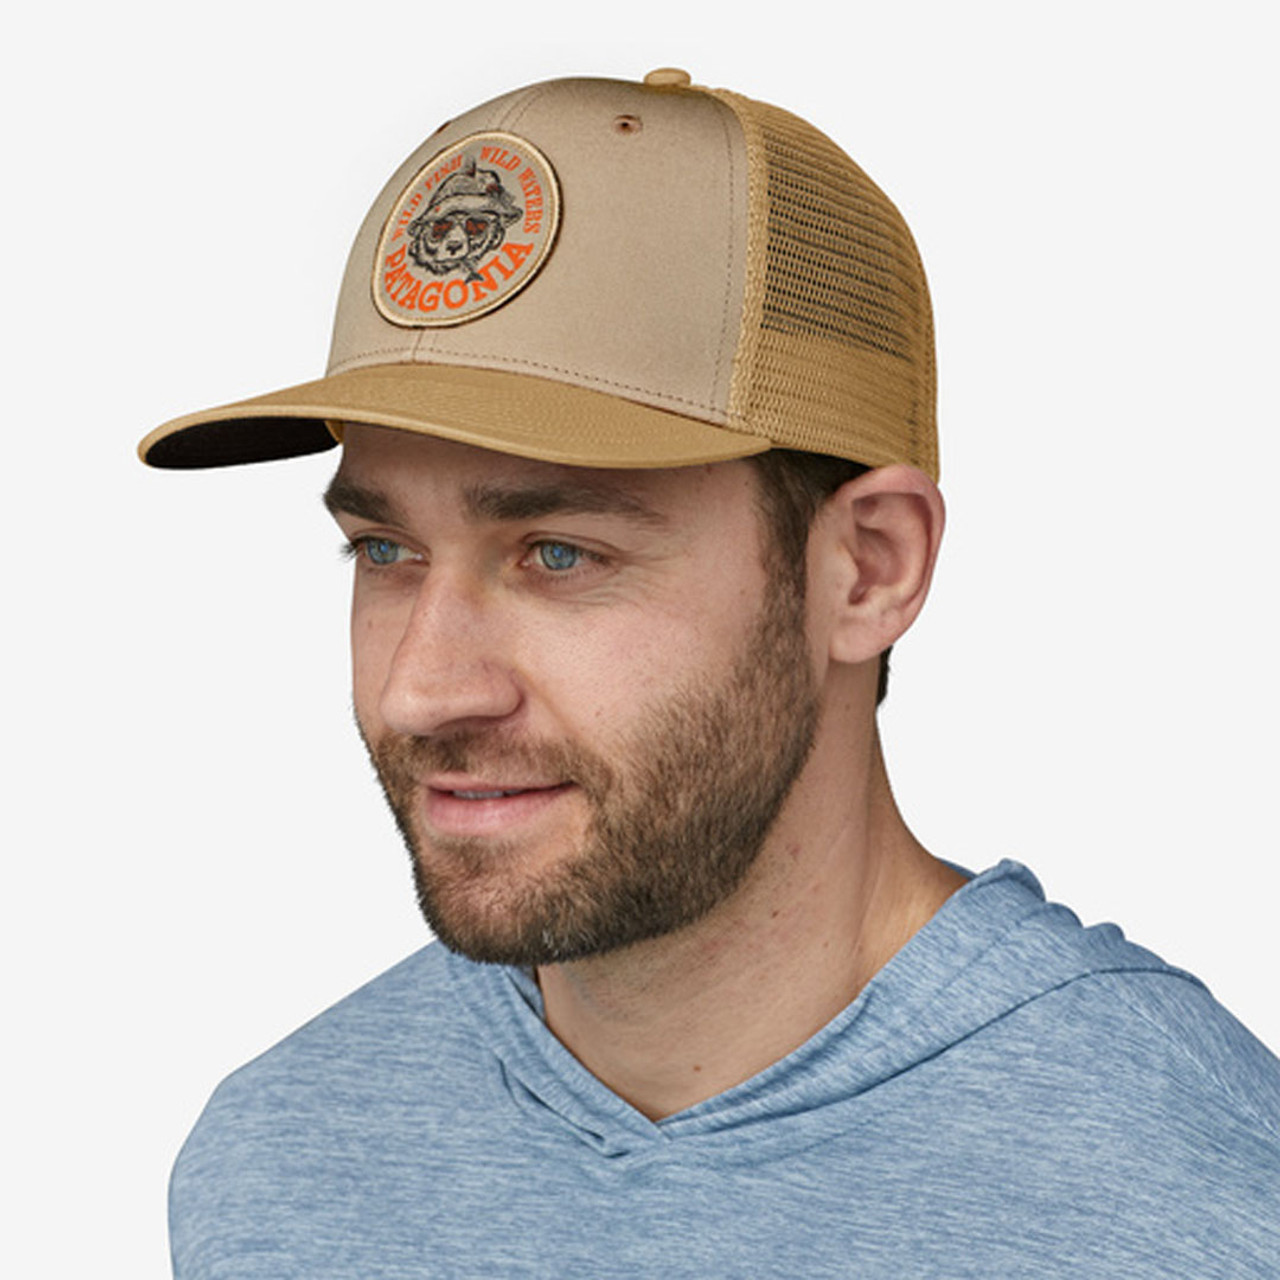 Patagonia Men's Take a Stand Trucker Hat